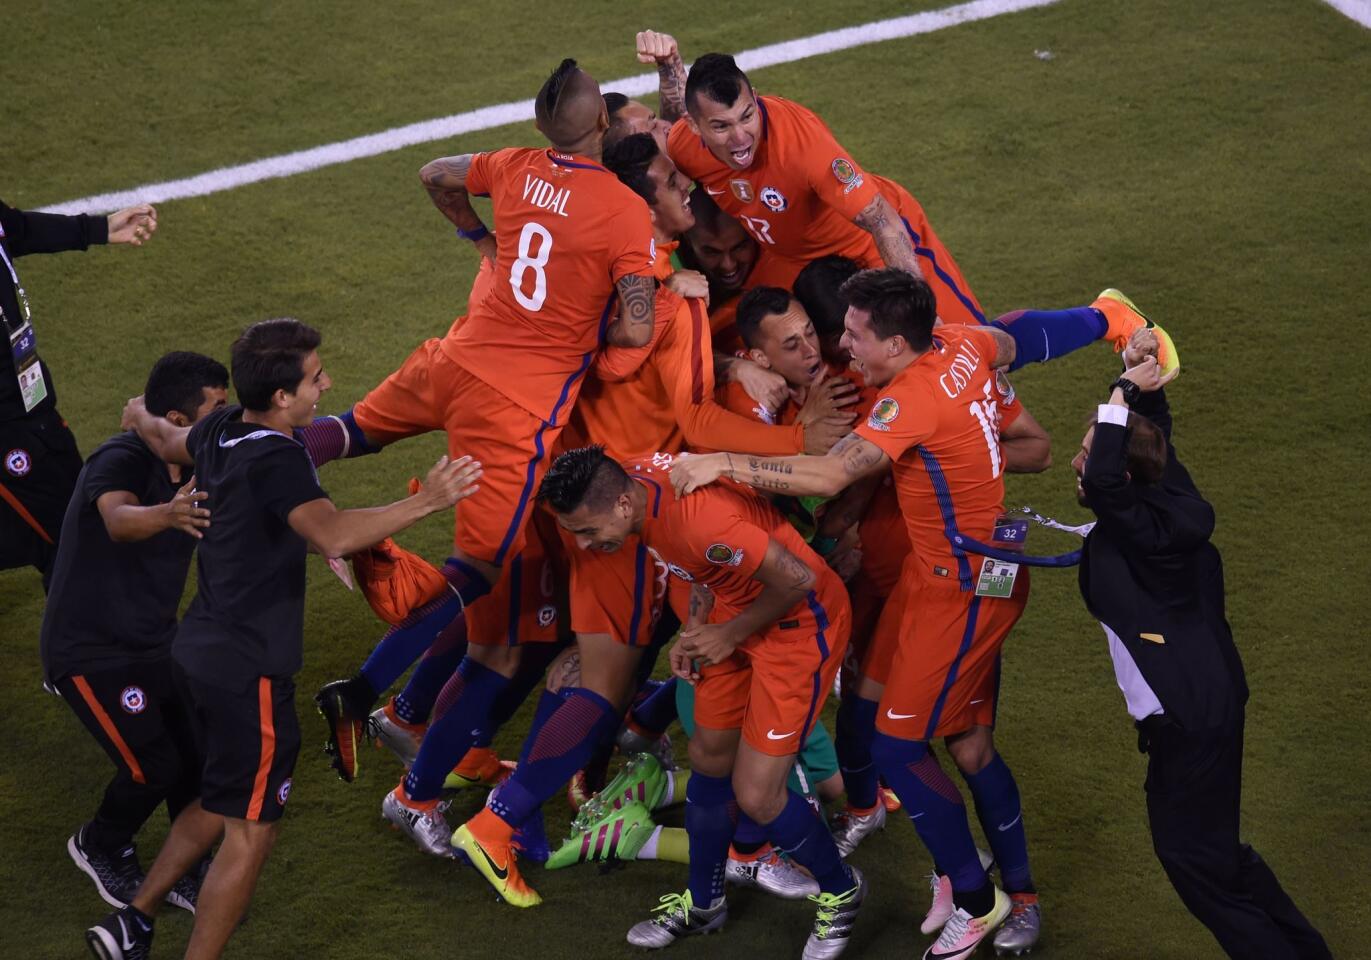 Chile's players celebrate after defeating Argentina in the penalty shoot-out and winning the Copa America Centenario final in East Rutherford, New Jersey, United States, on June 26, 2016. / AFP PHOTO / DON EMMERTDON EMMERT/AFP/Getty Images ** OUTS - ELSENT, FPG, CM - OUTS * NM, PH, VA if sourced by CT, LA or MoD **